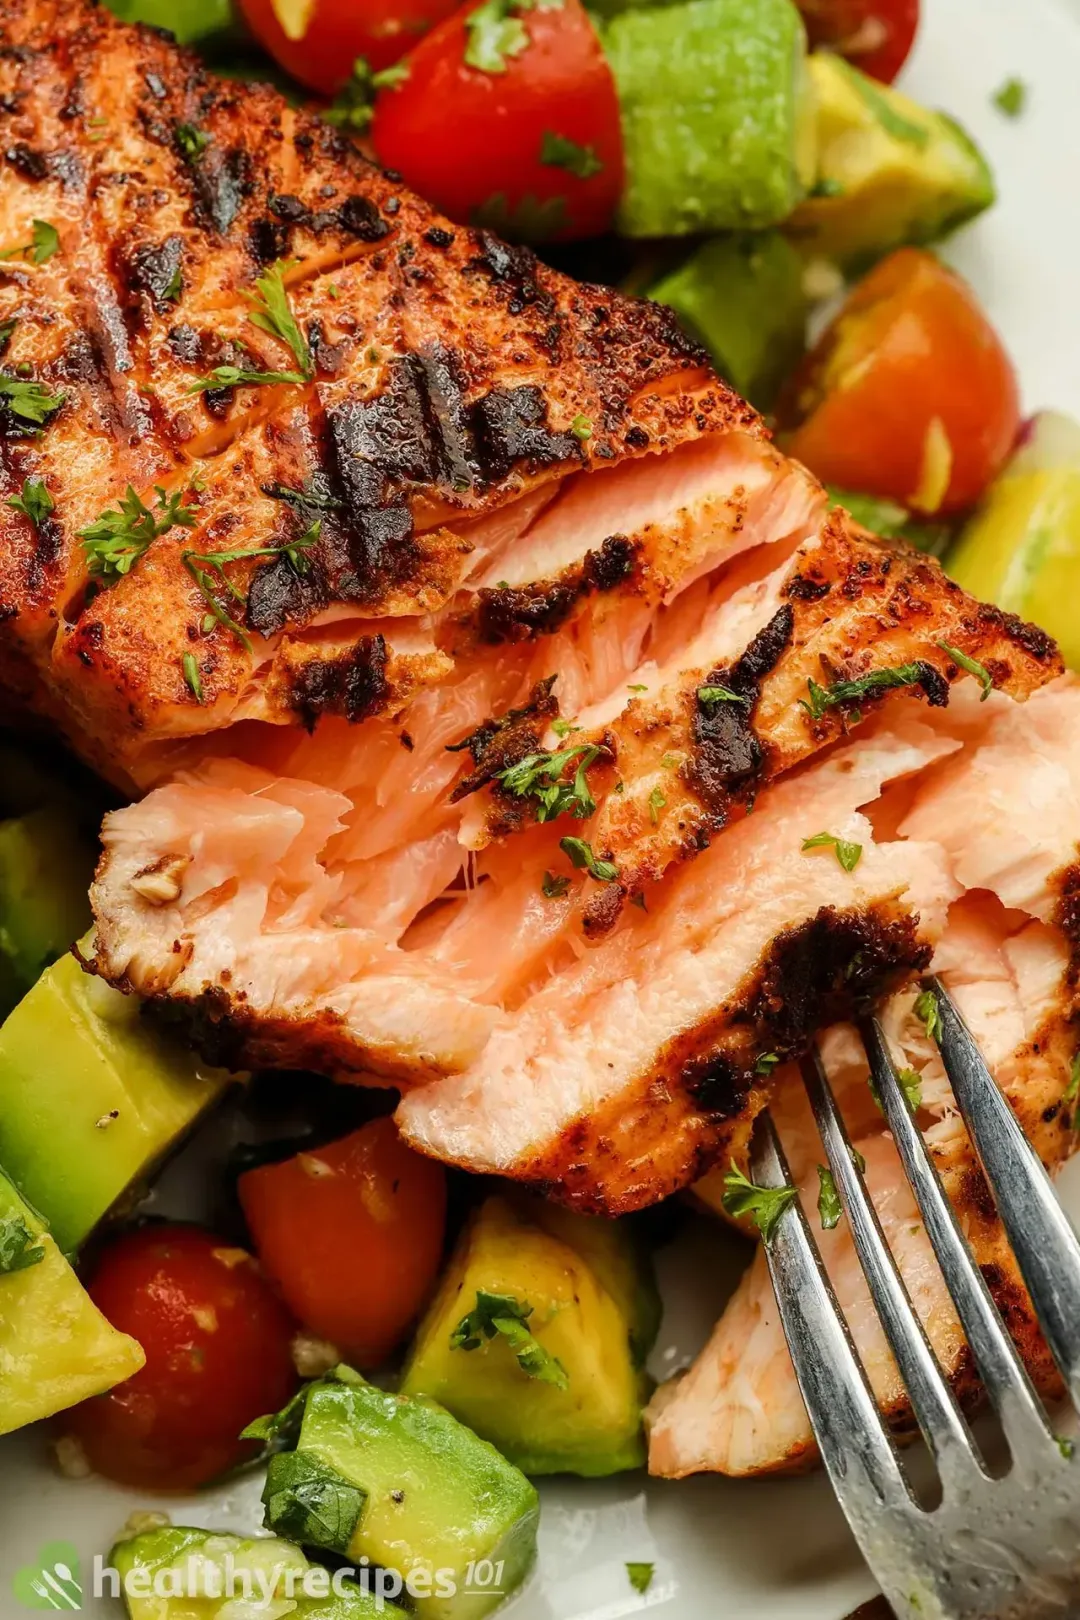 A close-up shot of a piece of seared salmon on top of avocado and tomato salsa